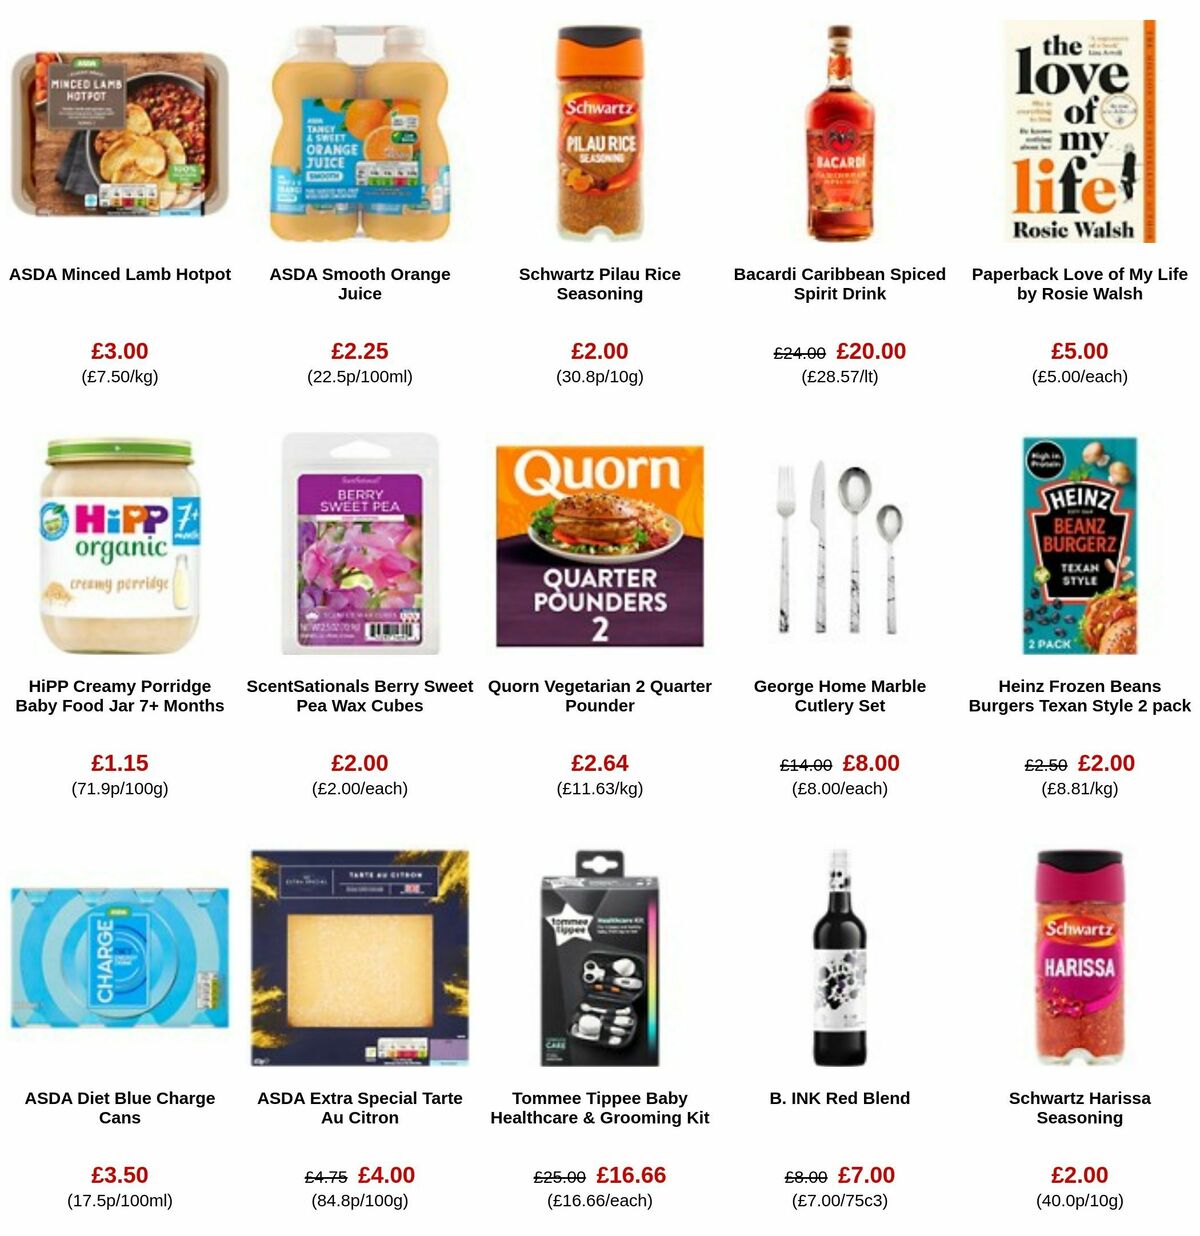 ASDA Offers from 28 July